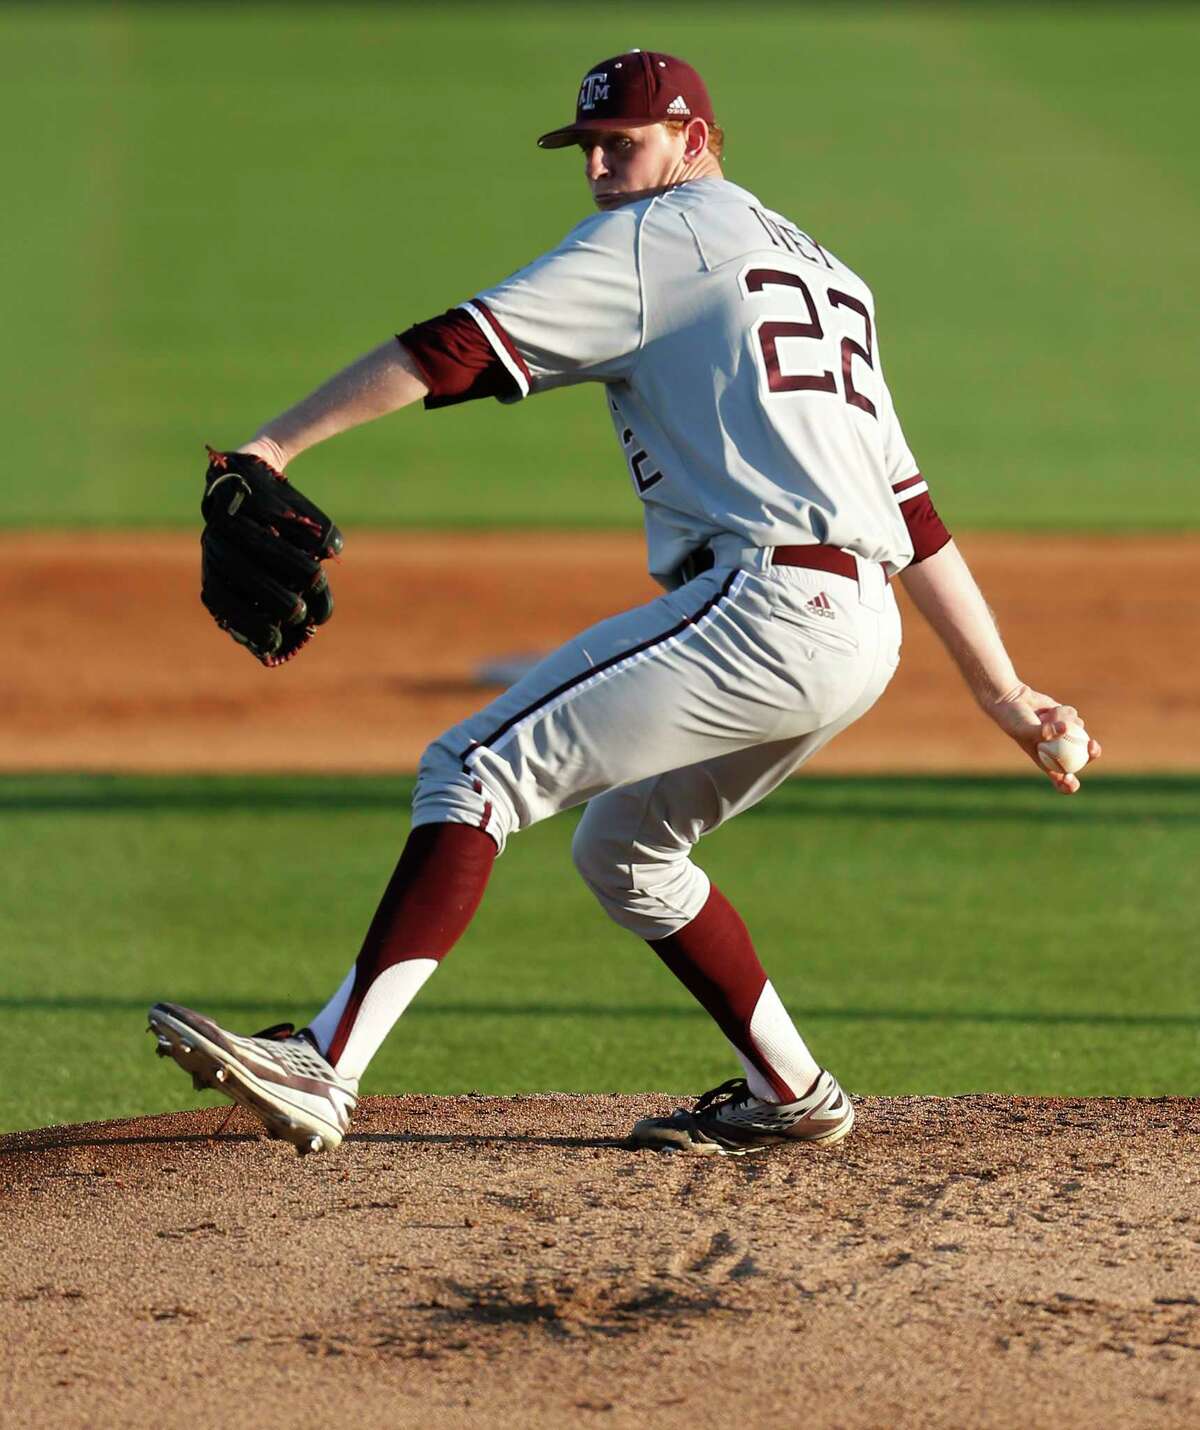 Texas A&M pitcher Tyler Ivey (22) pitches in the first inning of a college baseball game at Reckling Park Tuesday, April 5, 2016, in Houston. ( Karen Warren / Houston Chronicle )